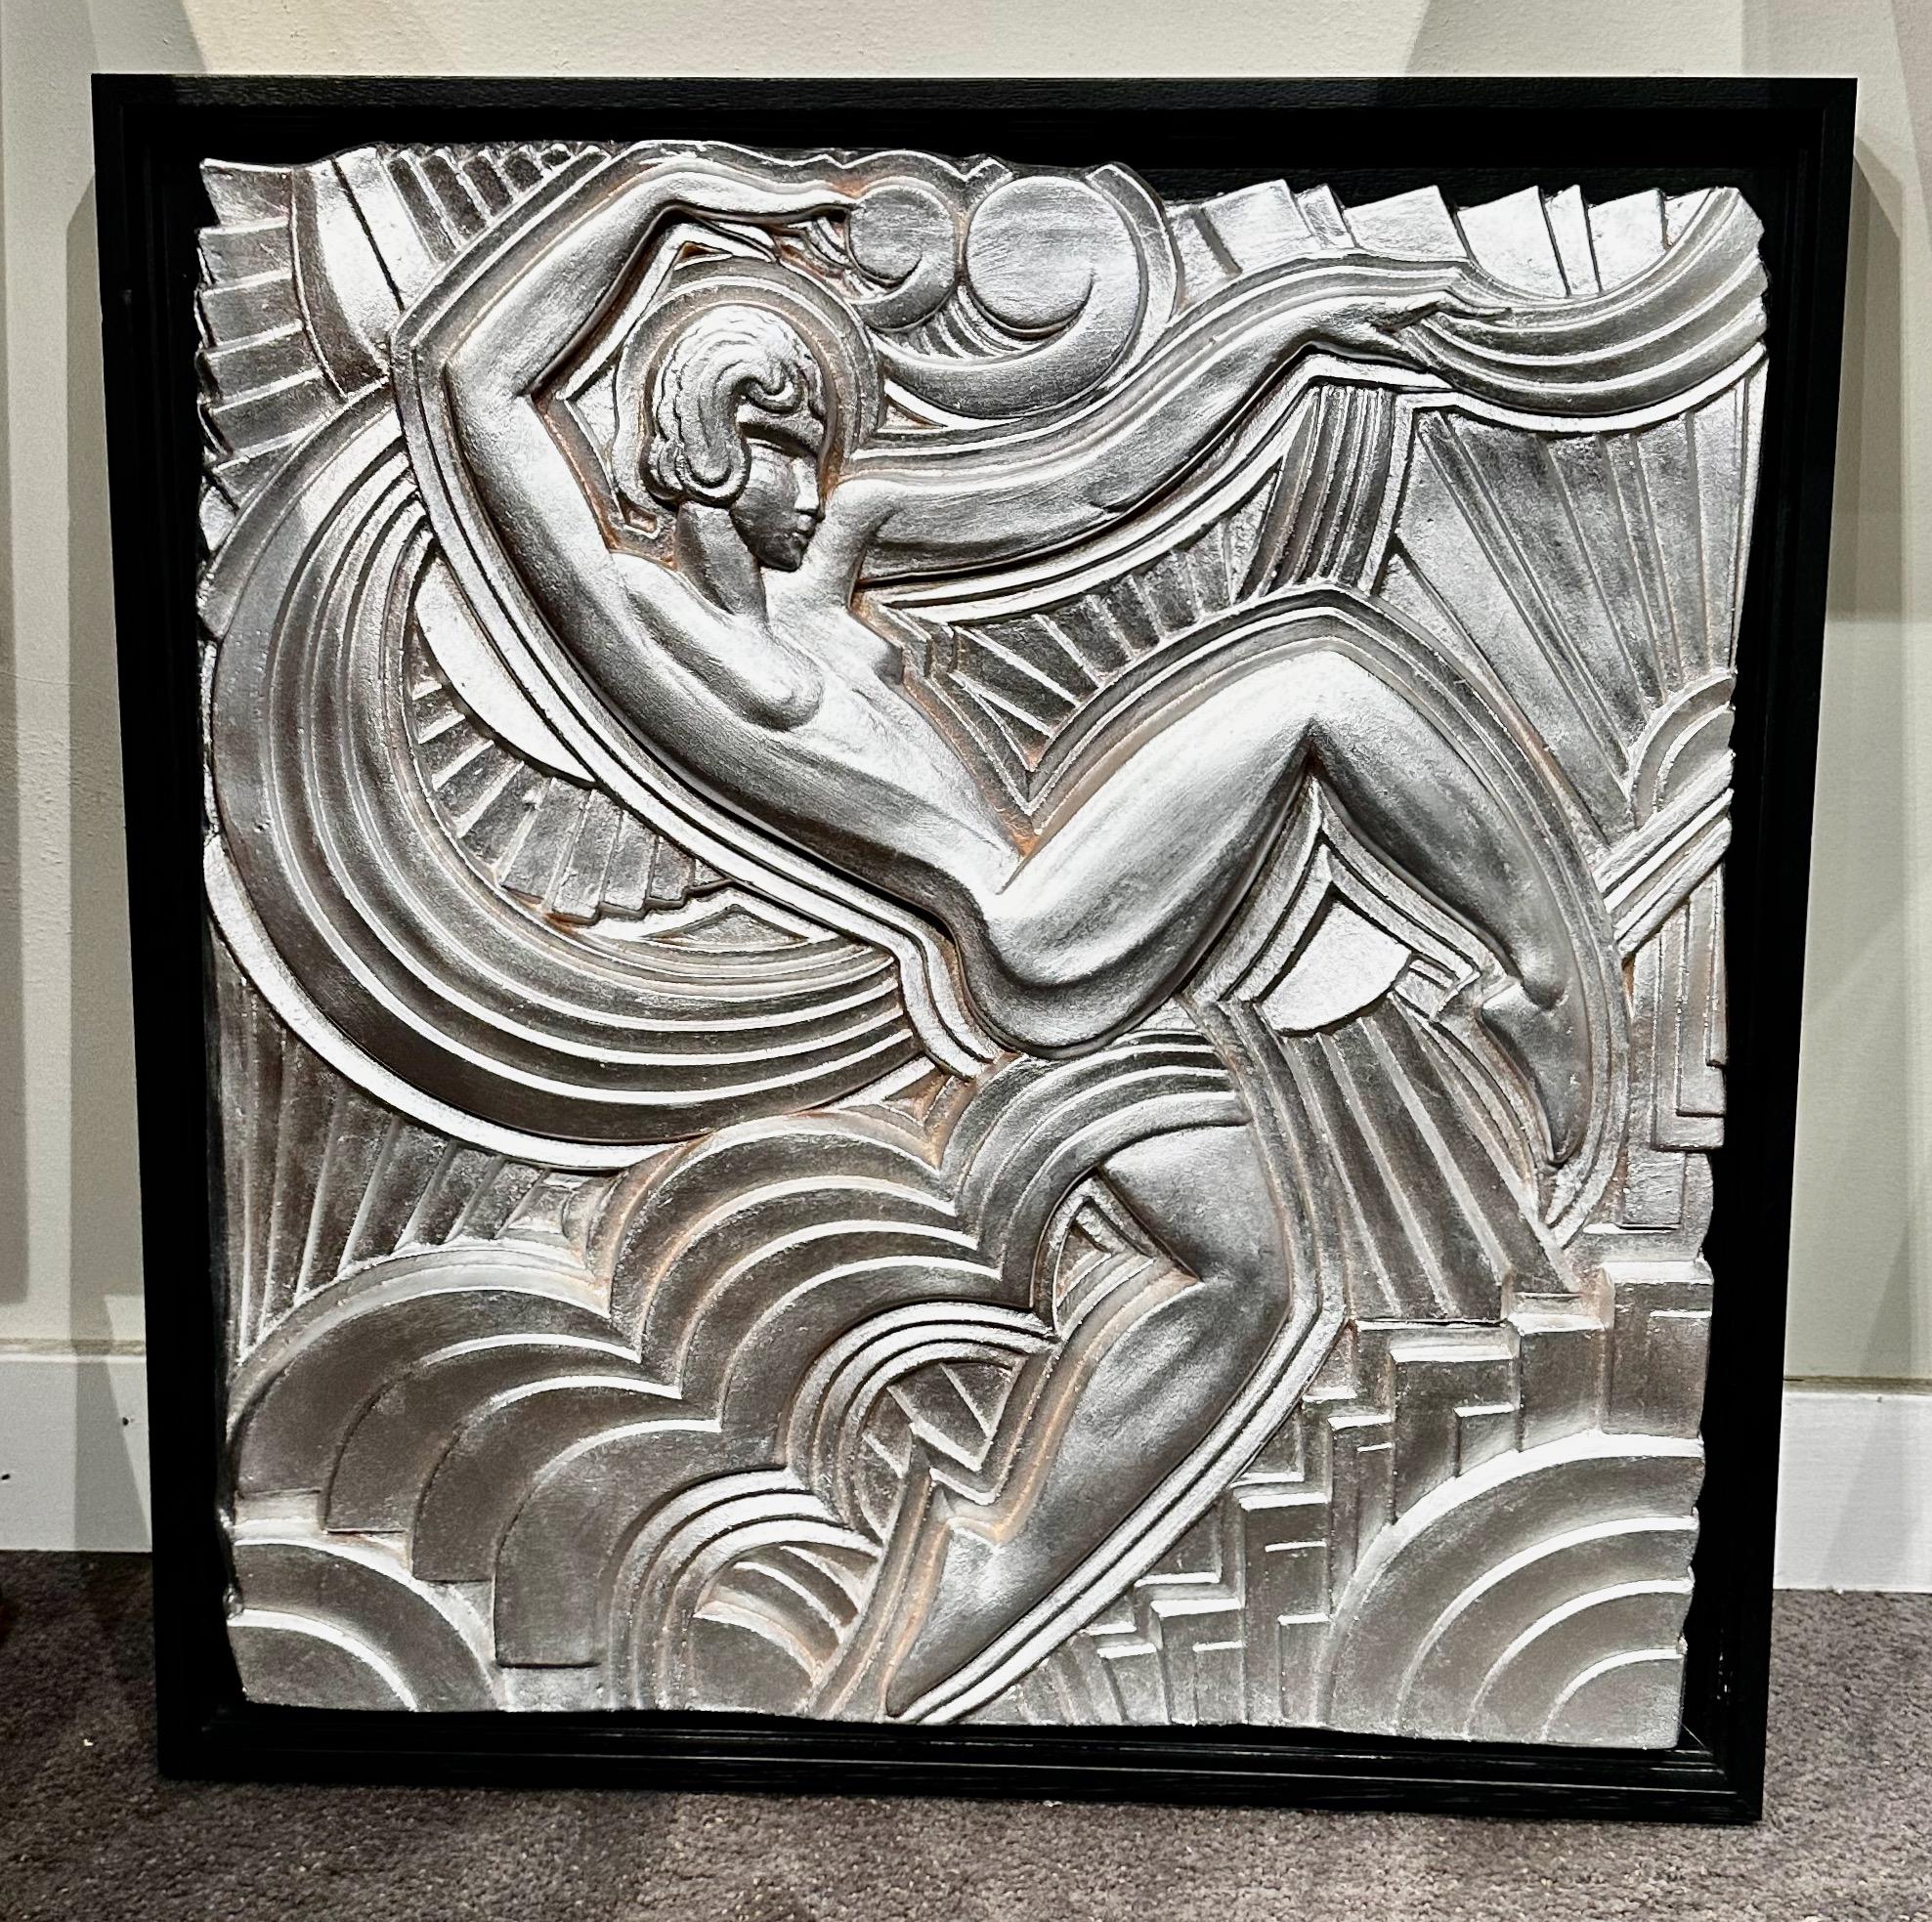 Plaque by Maurice Picaud Silver-leaf on Terracotta. Iconic art deco image handcrafted in reduced versions of the facade bas-relief of the Folies-Bergeres cabaret which was originally made by Maurice Picaud aka Pico (1900-1977).

This stylish plaque